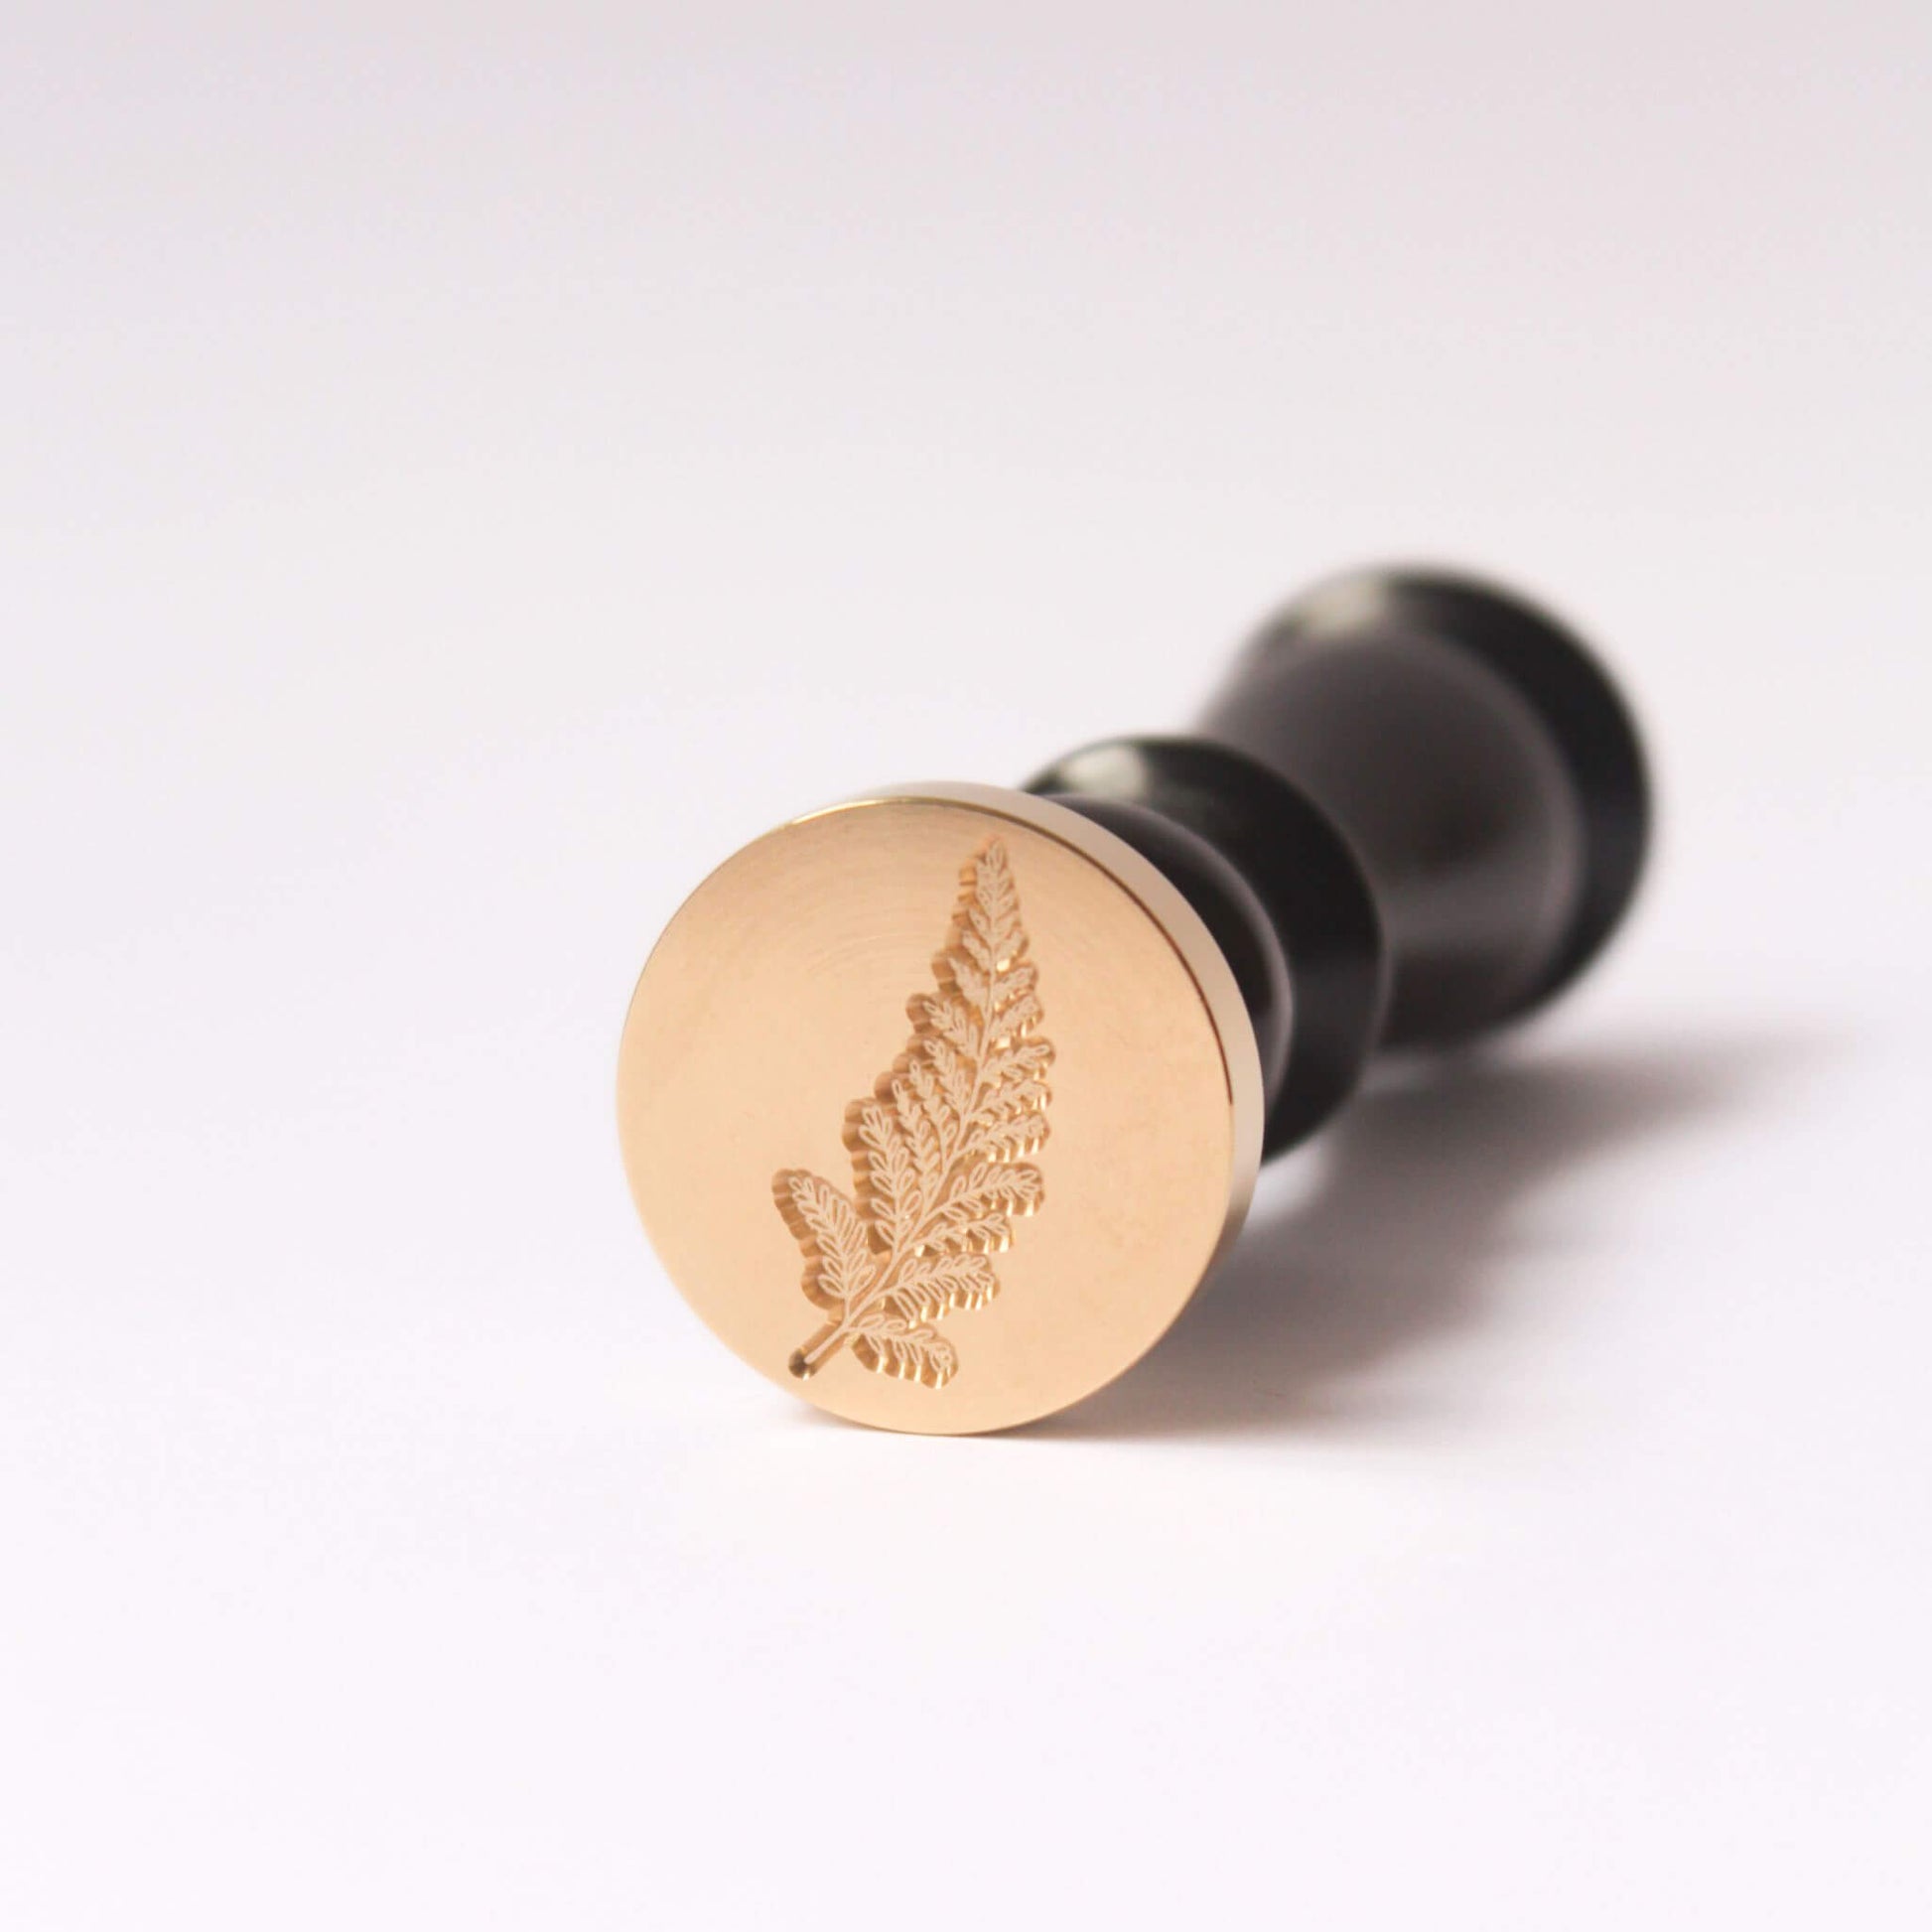 Fern design engraved onto brass wax seal head with vintage style black wood handle